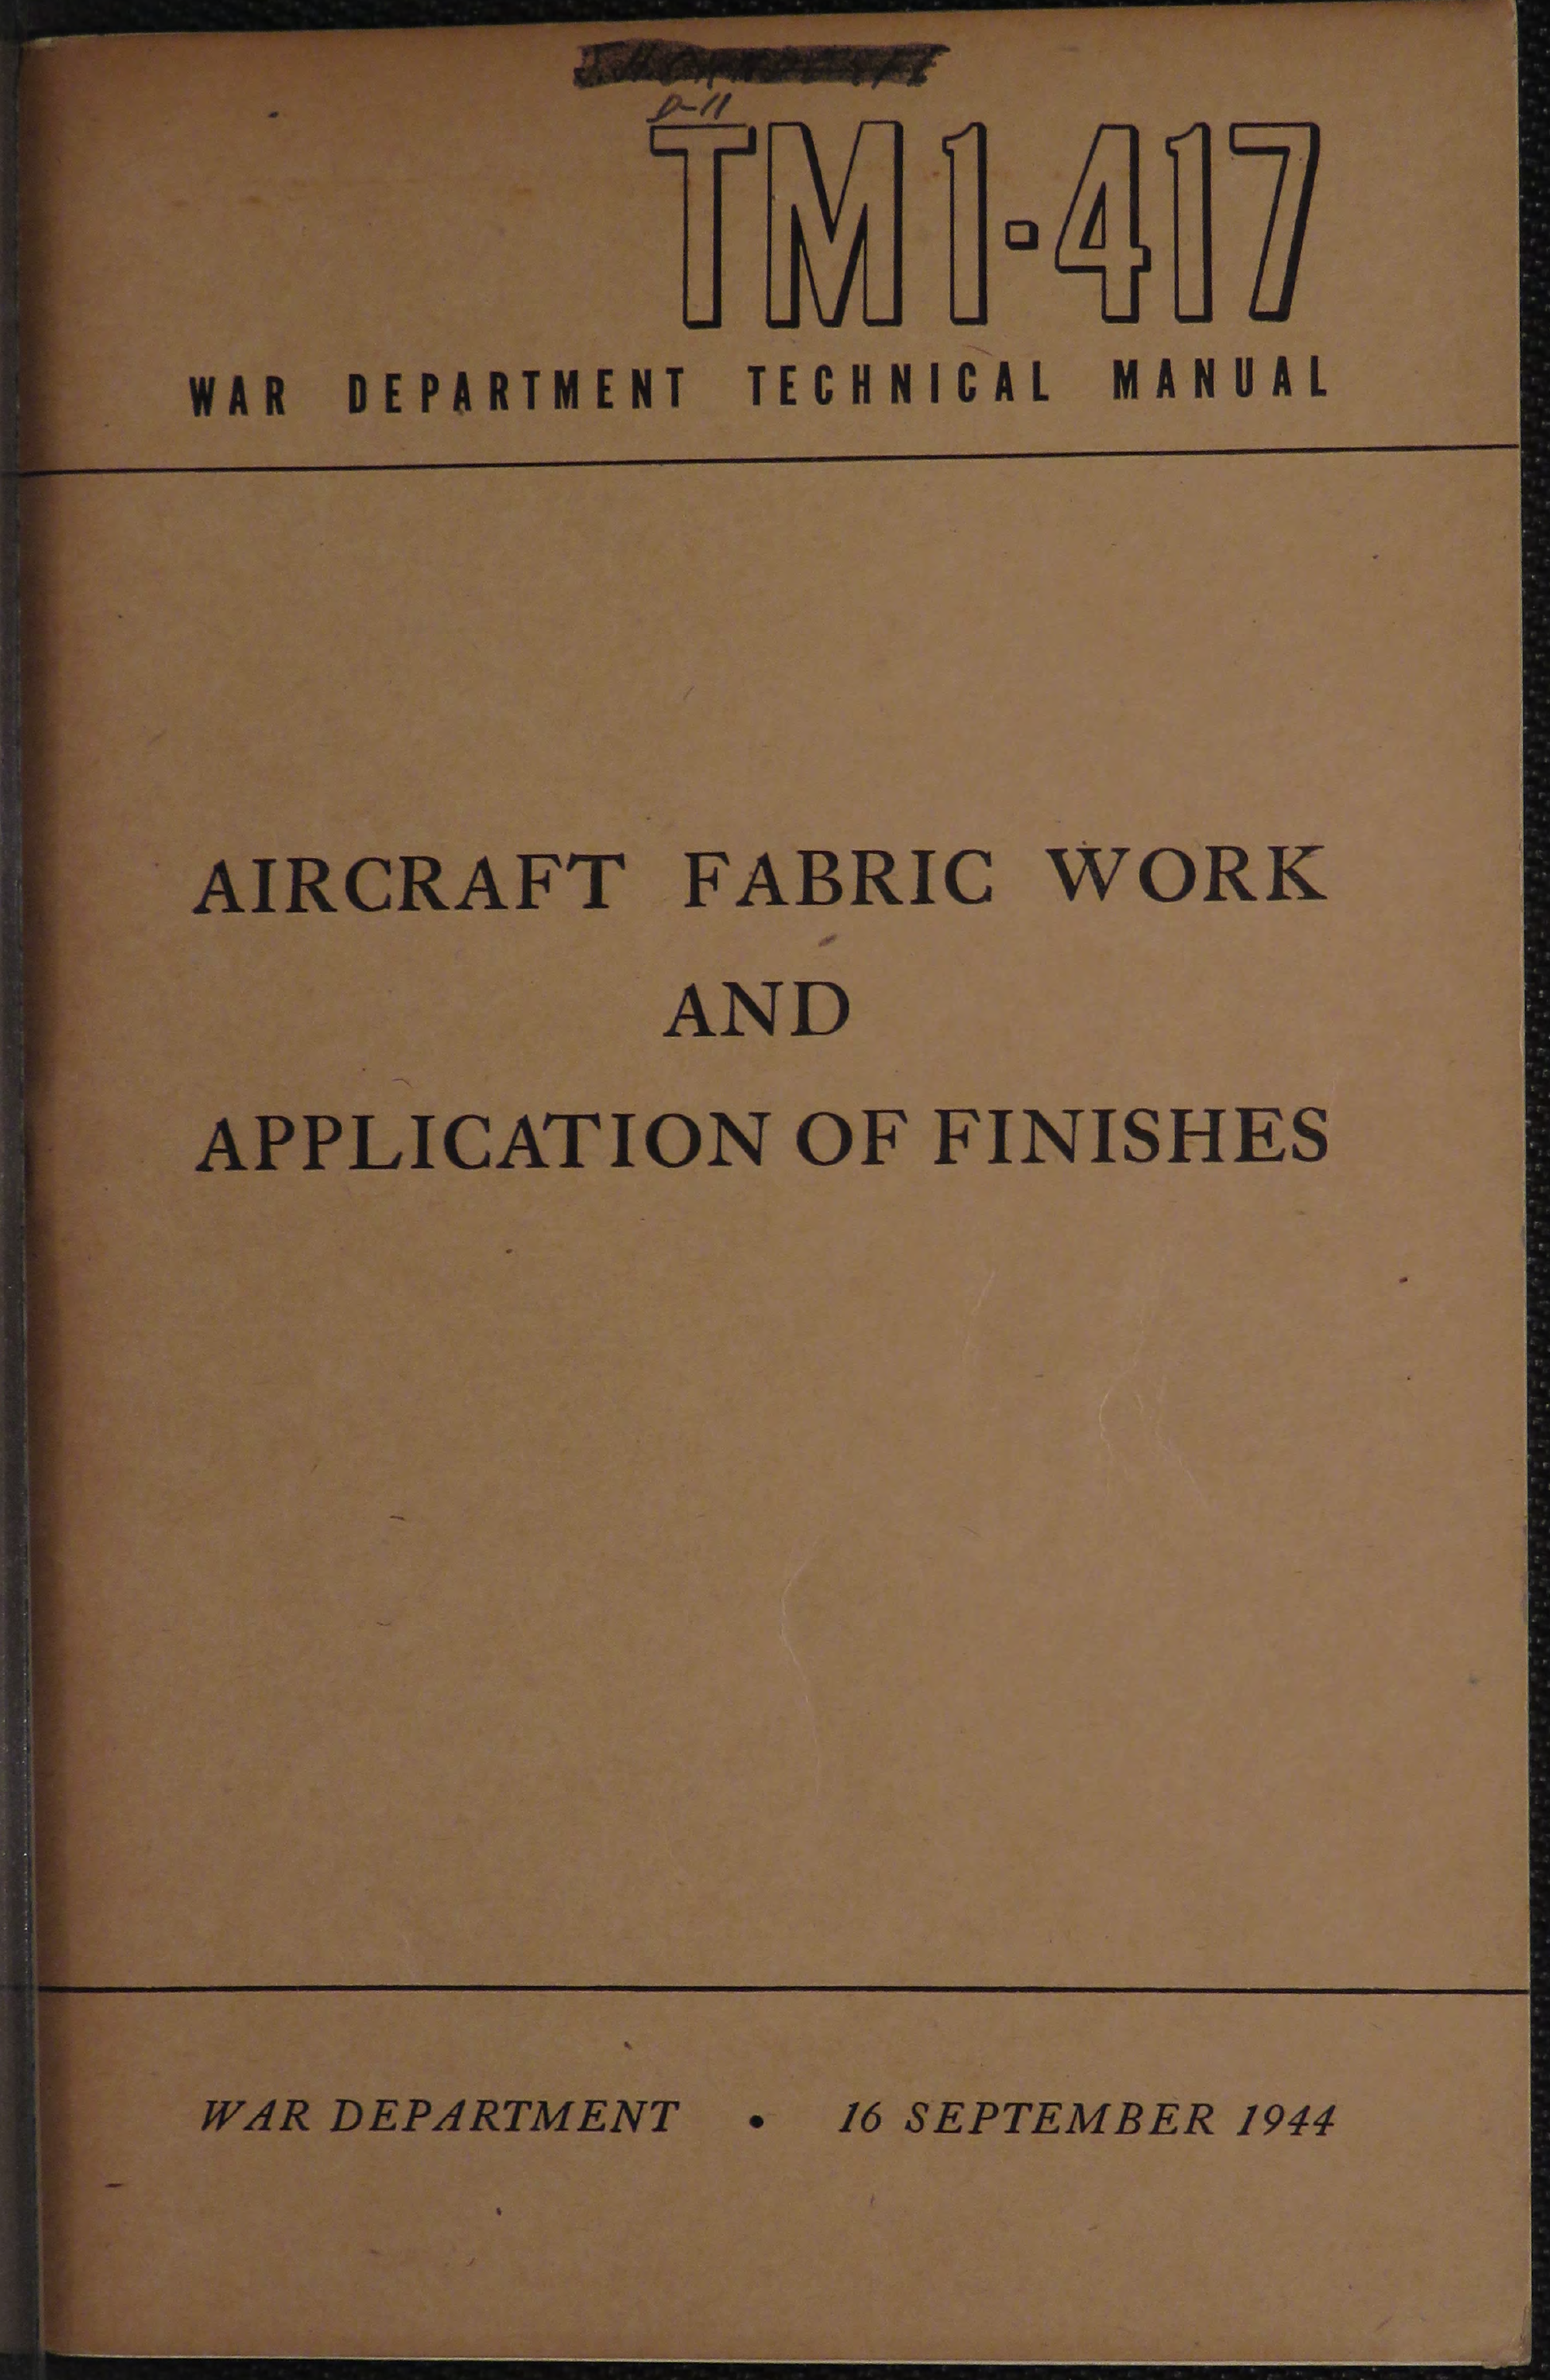 Sample page 1 from AirCorps Library document: Aircraft Fabric Work and Applications of Finishes